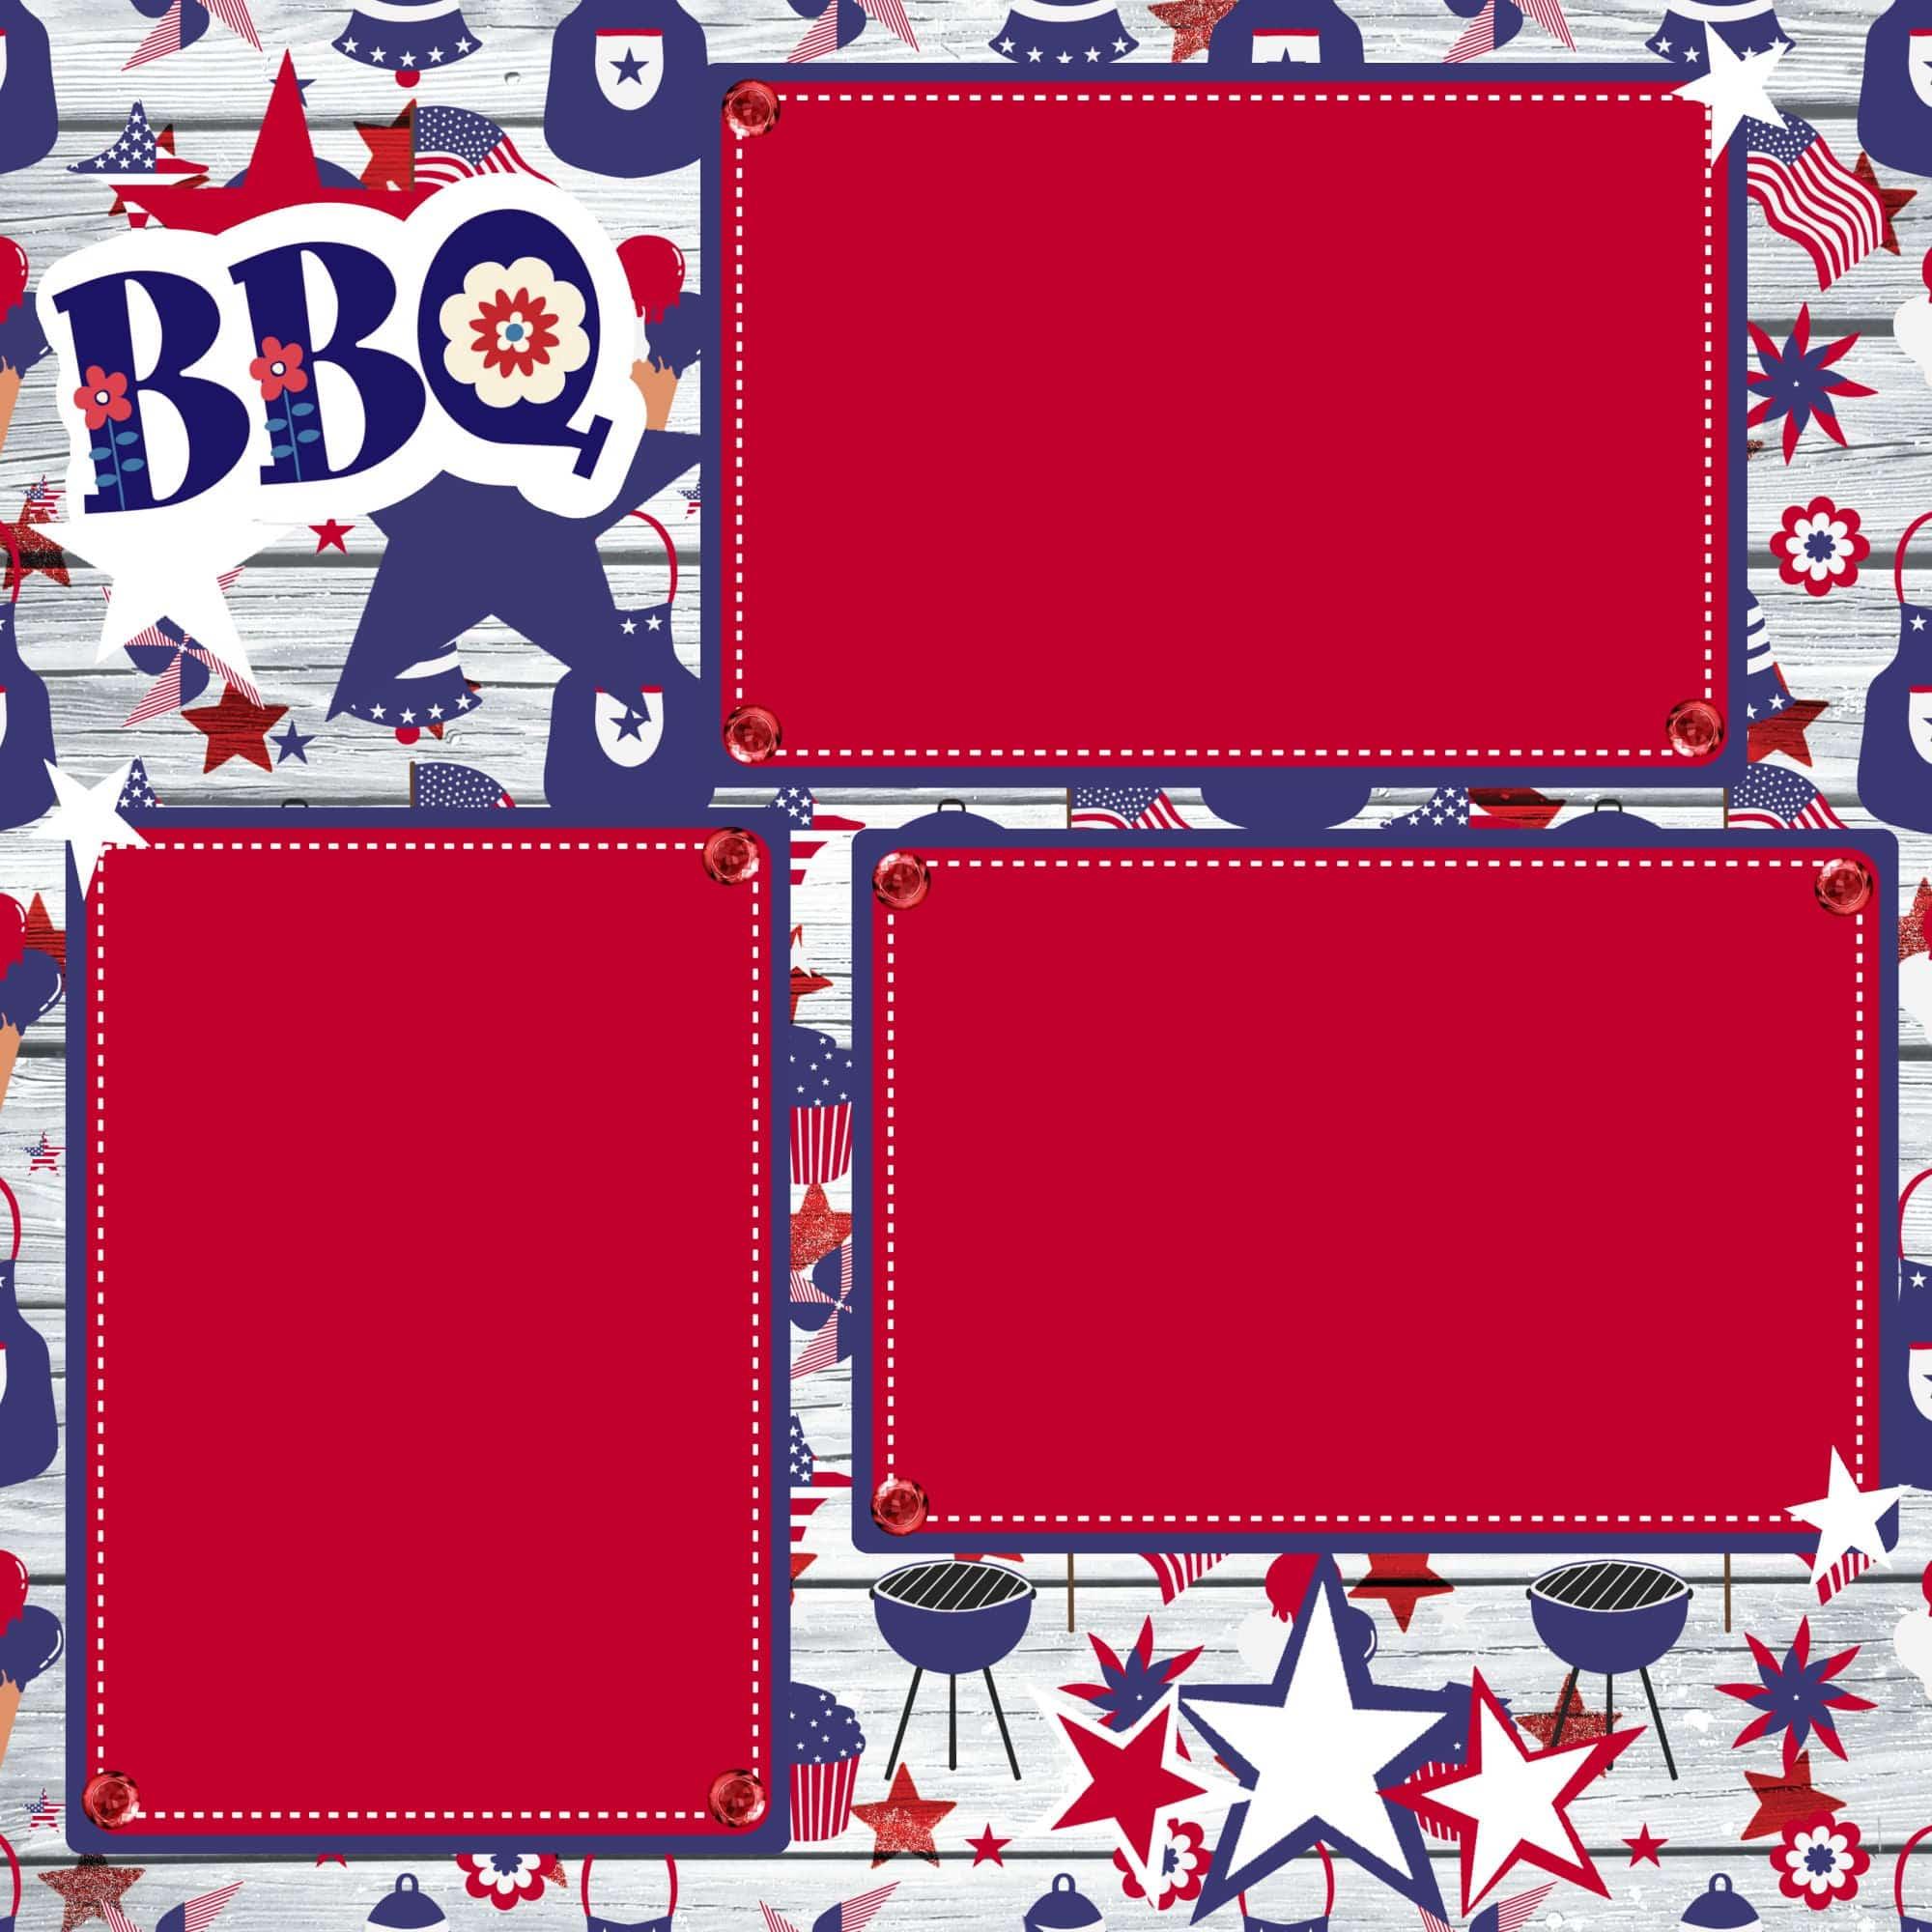 Memorial Day 2023 (2) - 12 x 12 Premade, Printed Scrapbook Pages by SSC Designs - Scrapbook Supply Companies